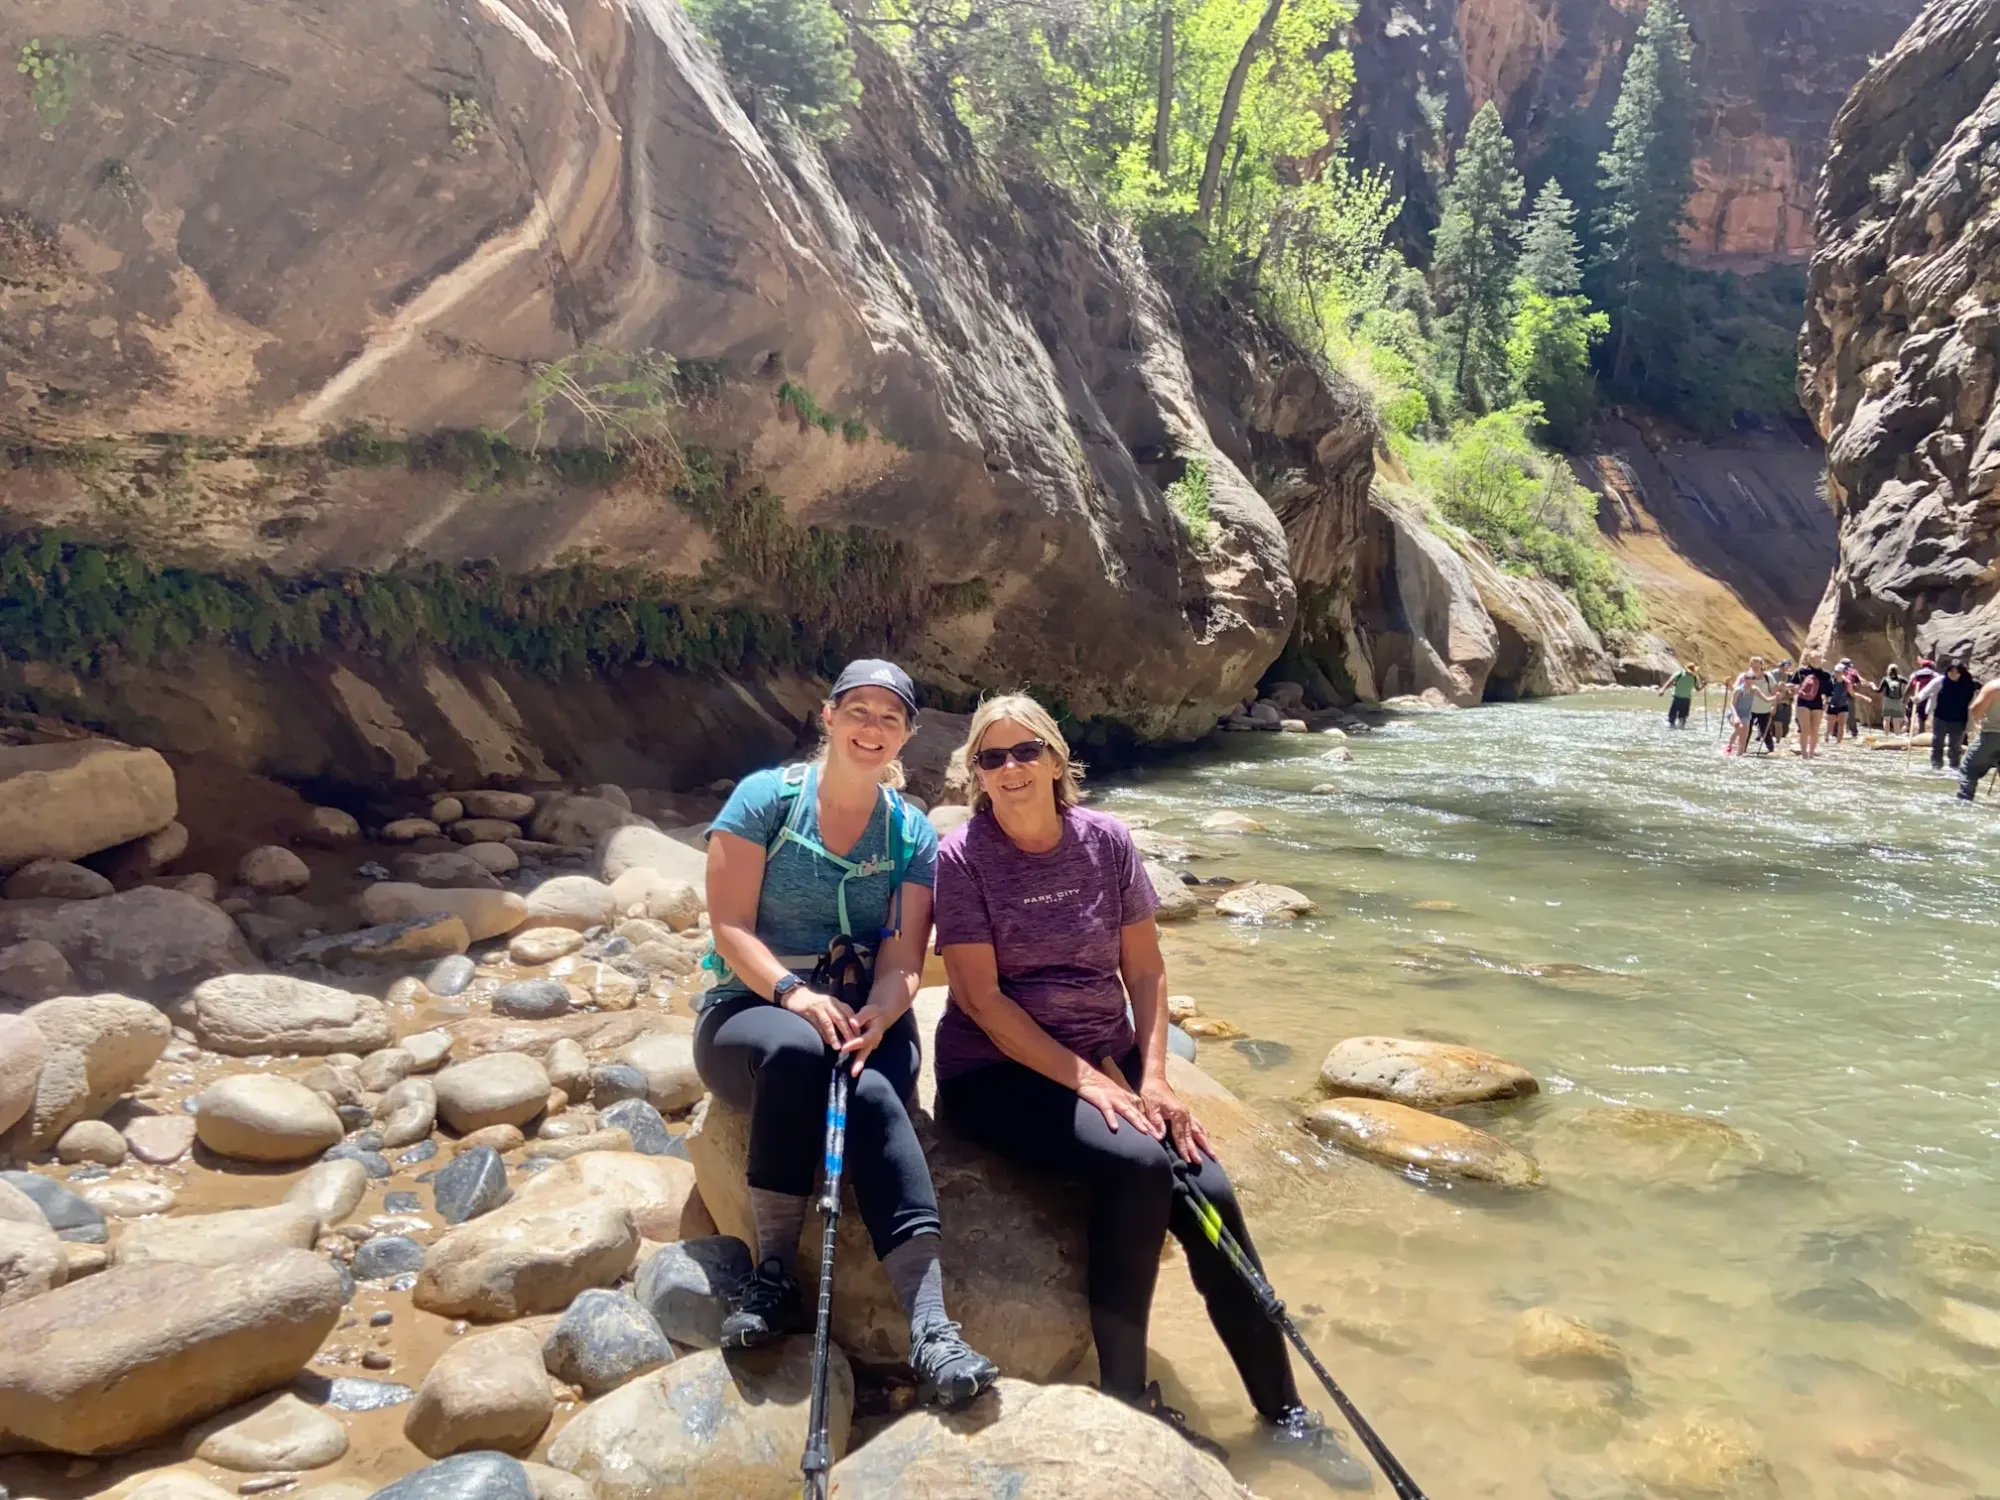 Lindsey and her Mom are hiking The Narrows at Zion National Park